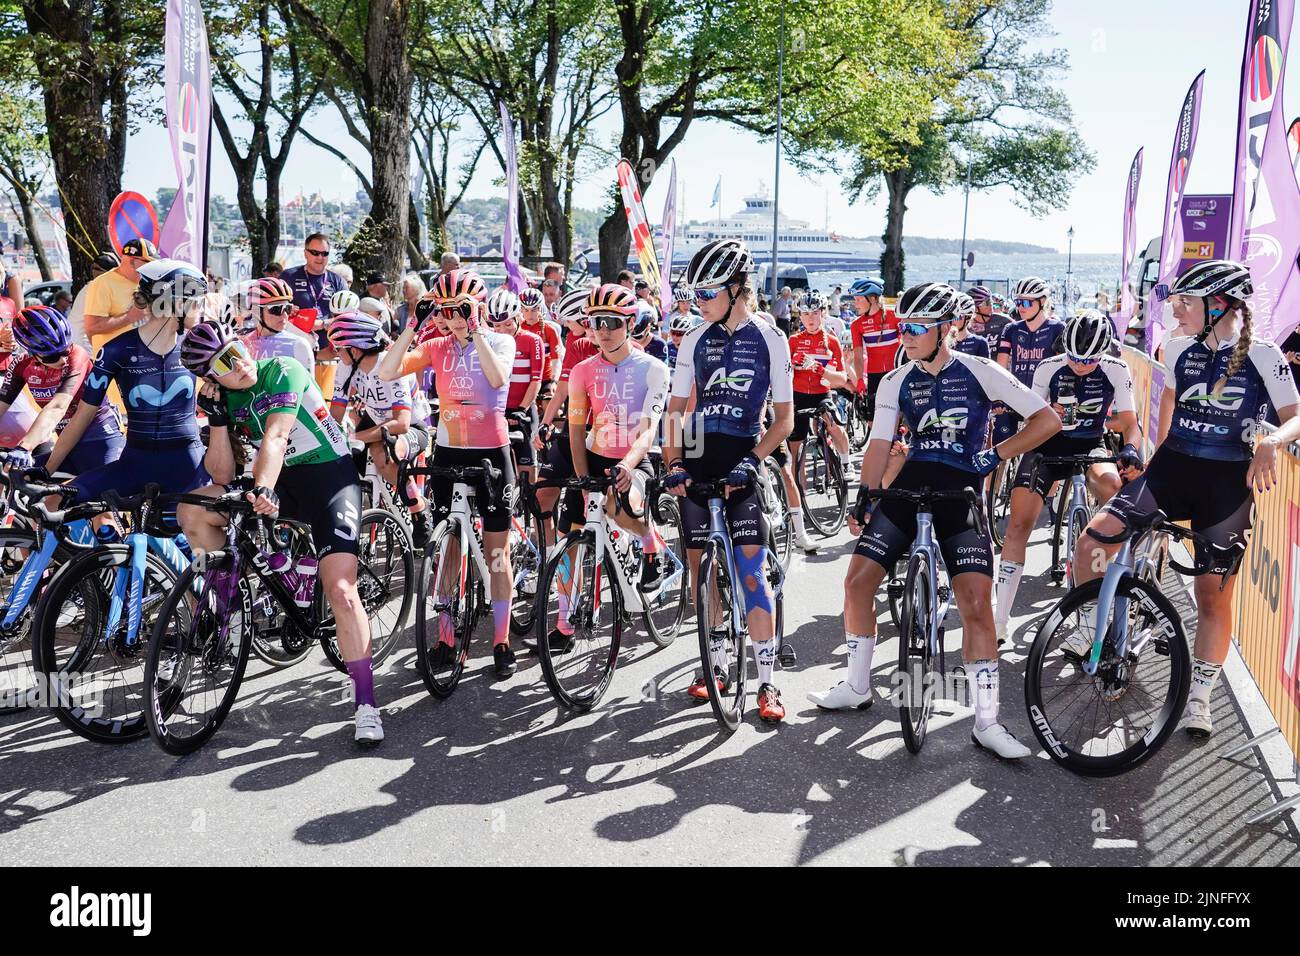 Moss 20220811.The cyclists are ready at the start of the third stage of the Tour of Scandinavia cycle race. The stage goes from Moss to Sarpsborg, a distance of 119 km. Photo: Heiko Junge / NTB Stock Photo